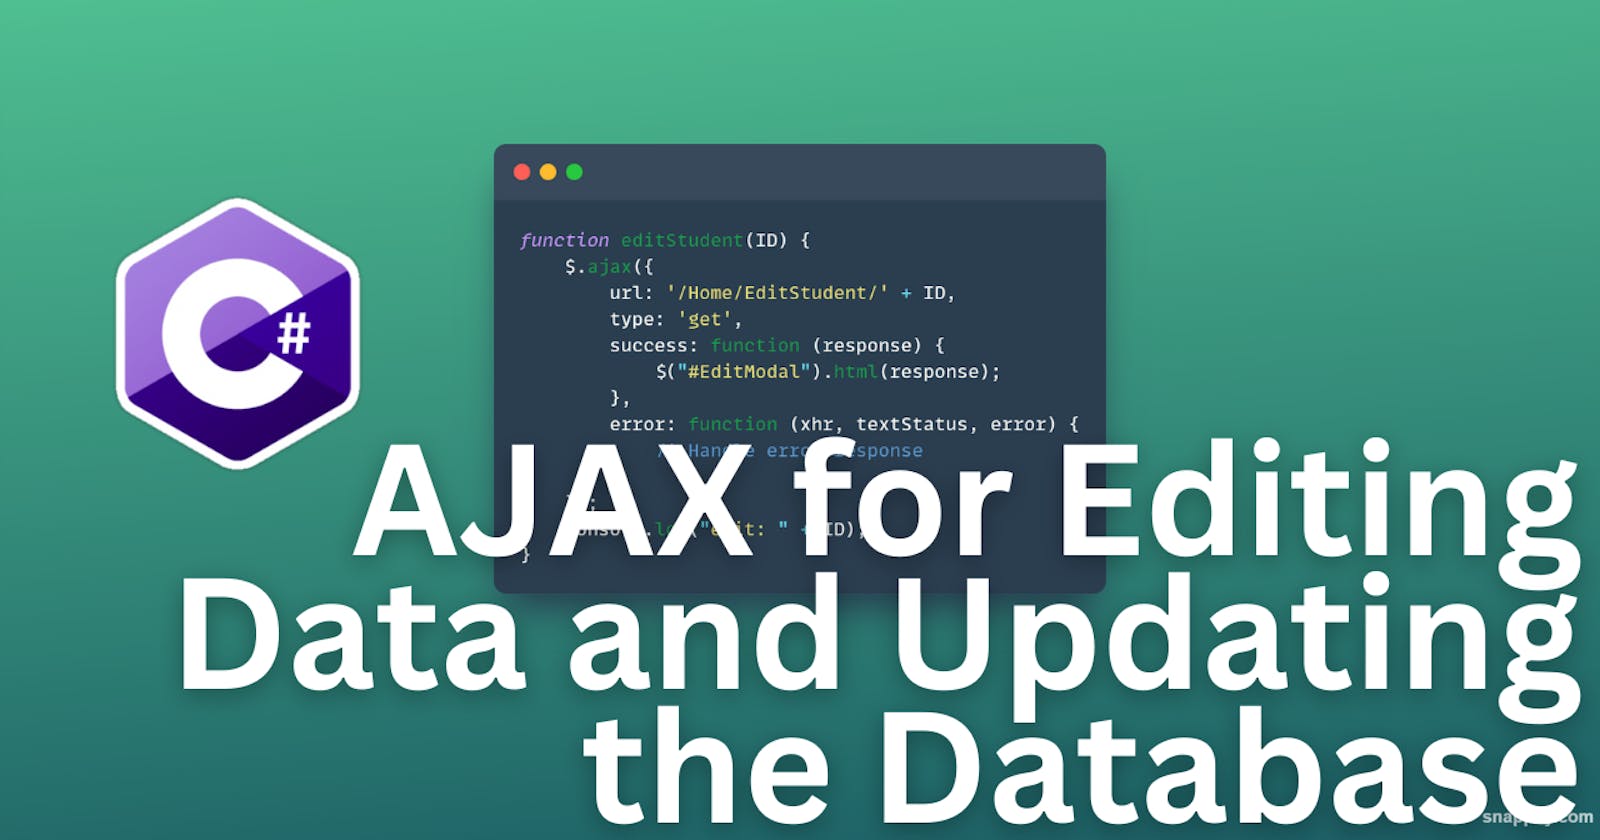 Implementing AJAX for Editing Data and Updating the Database in ASP.NET MVC